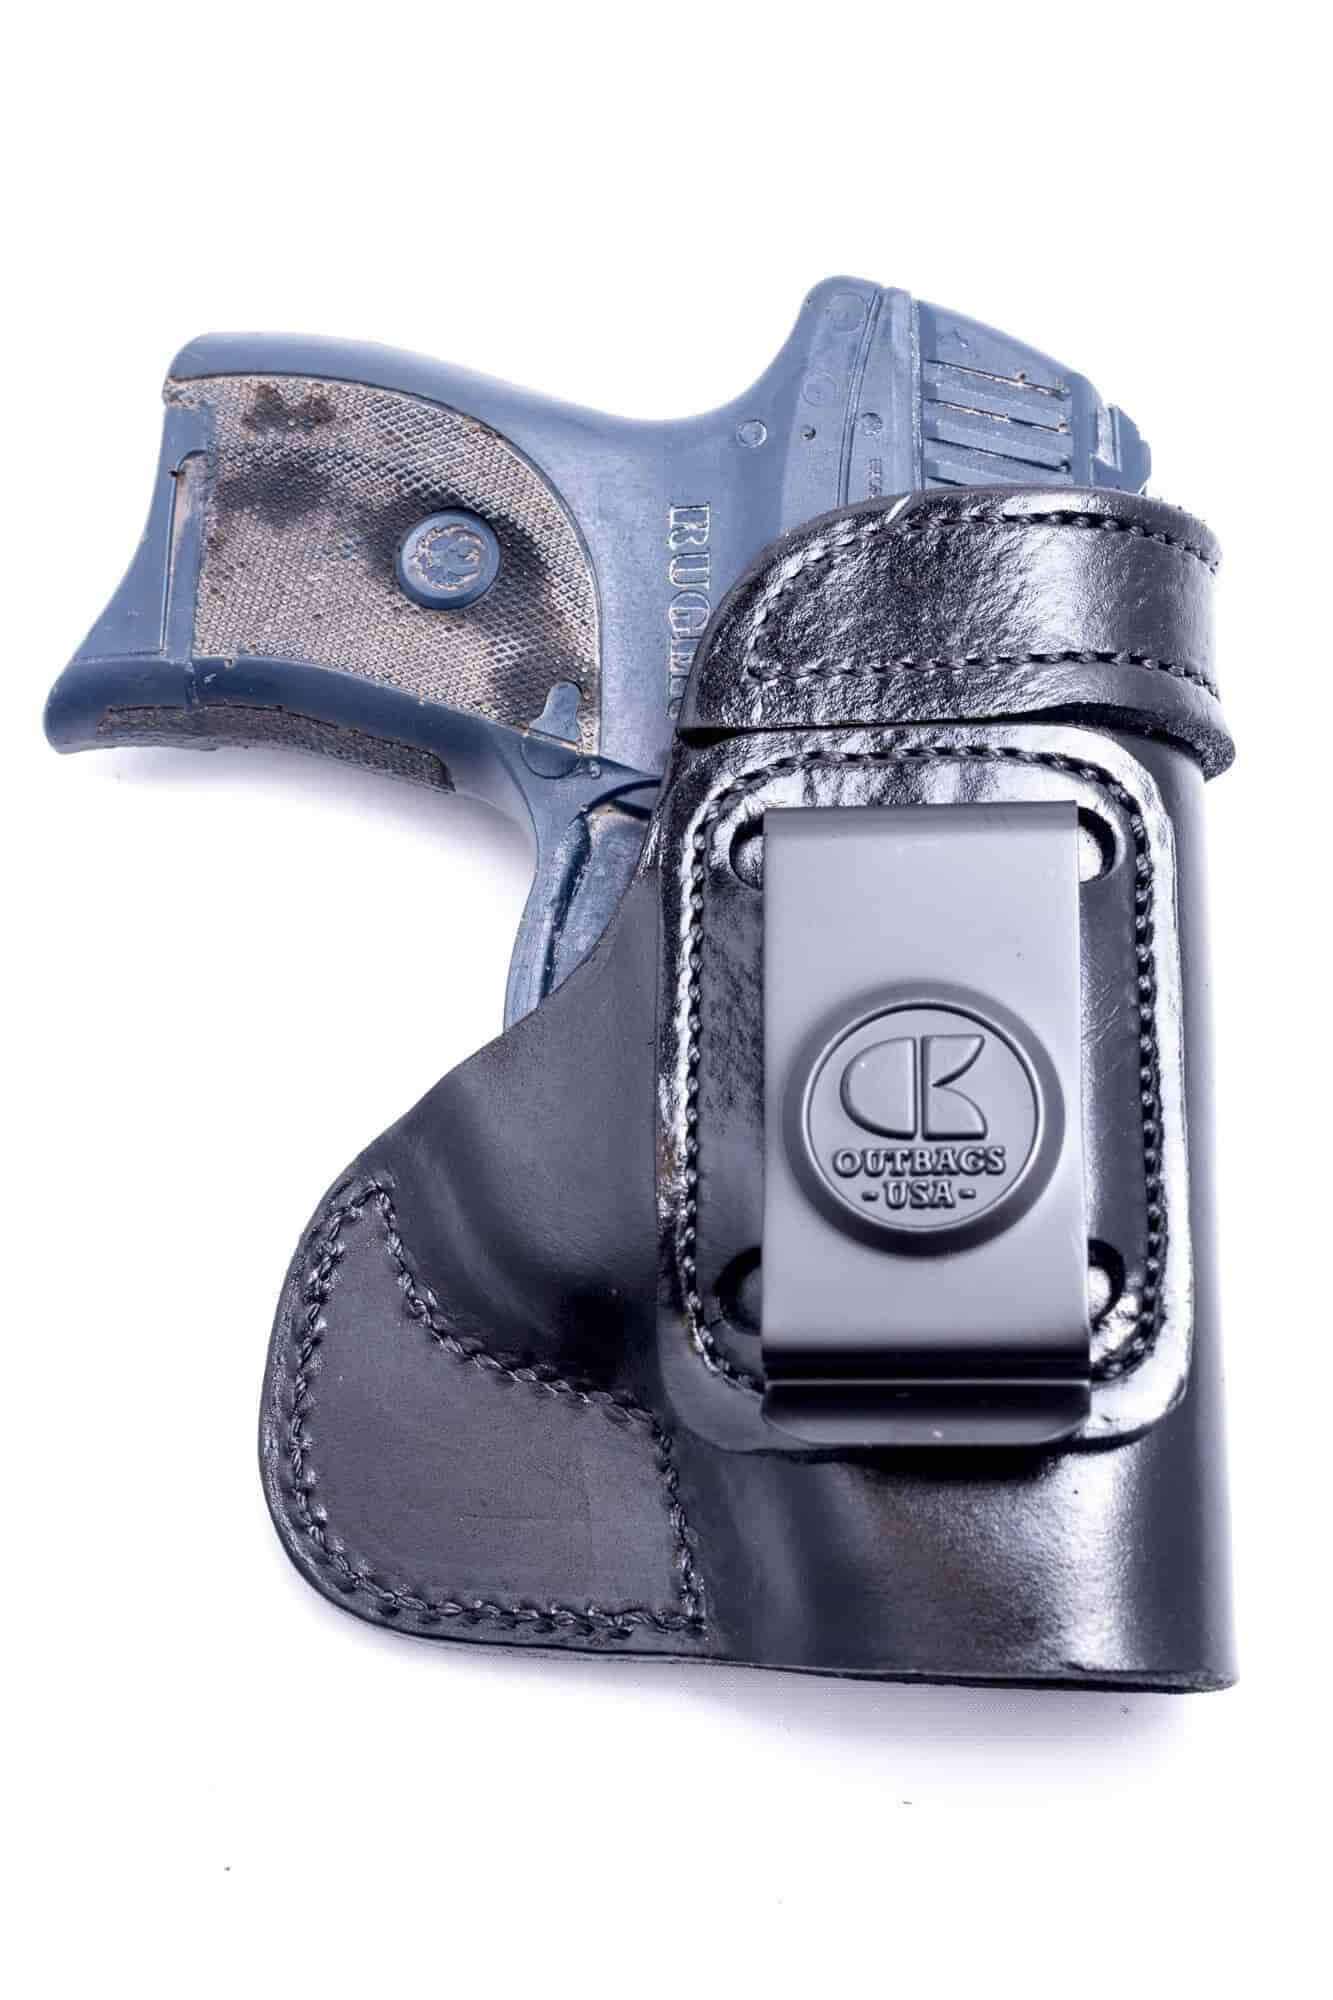 IWB Dual Clip Soft Leather Pancake Holster for Taurus G2/G3/G2C